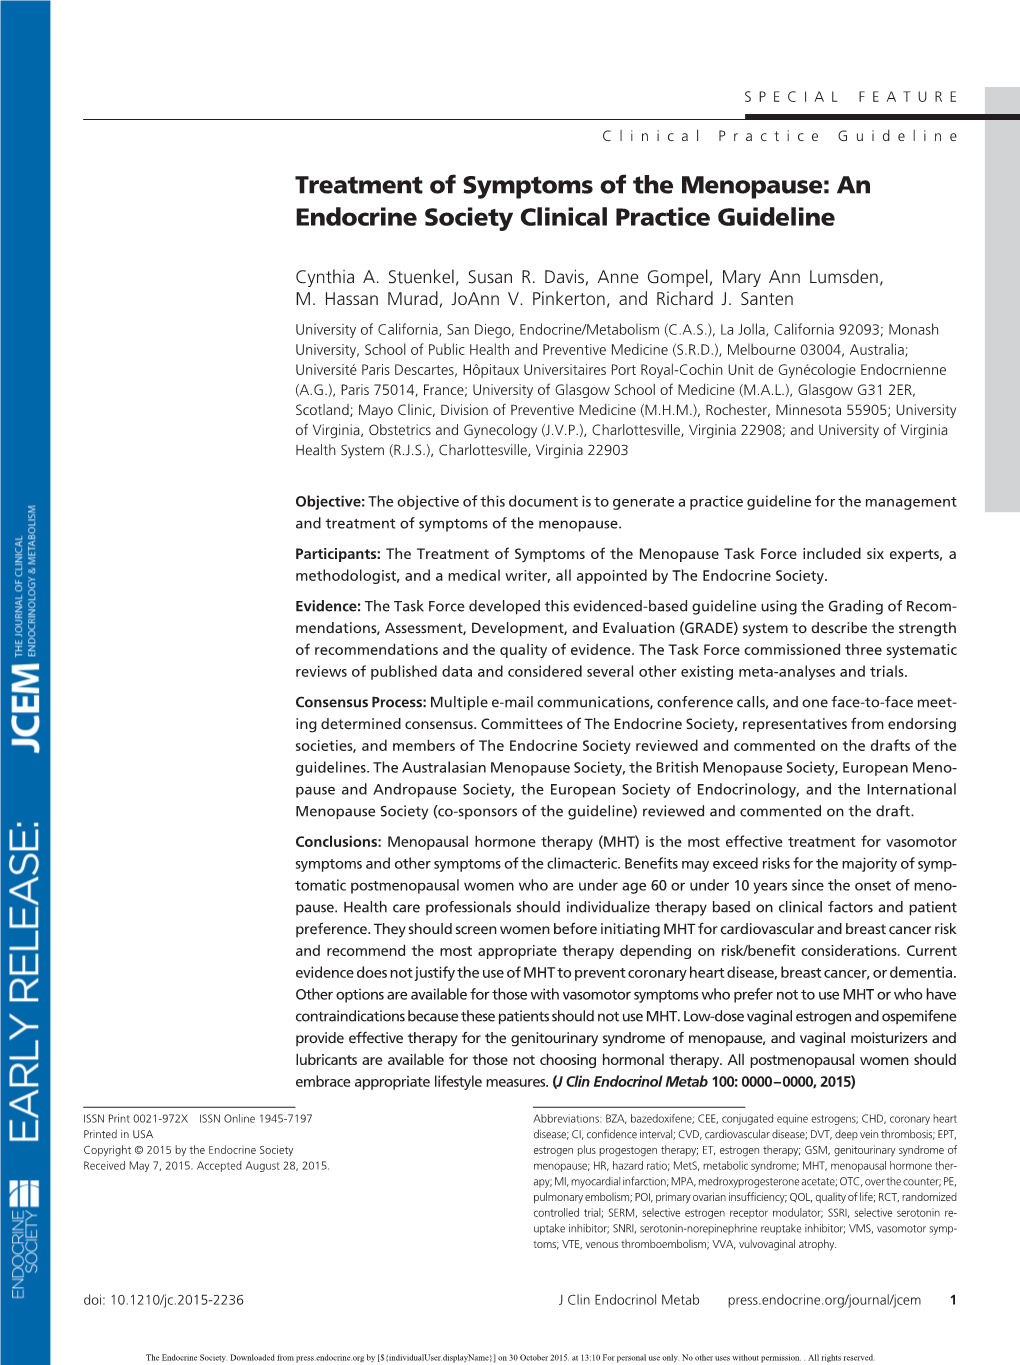 An Endocrine Society Clinical Practice Guideline